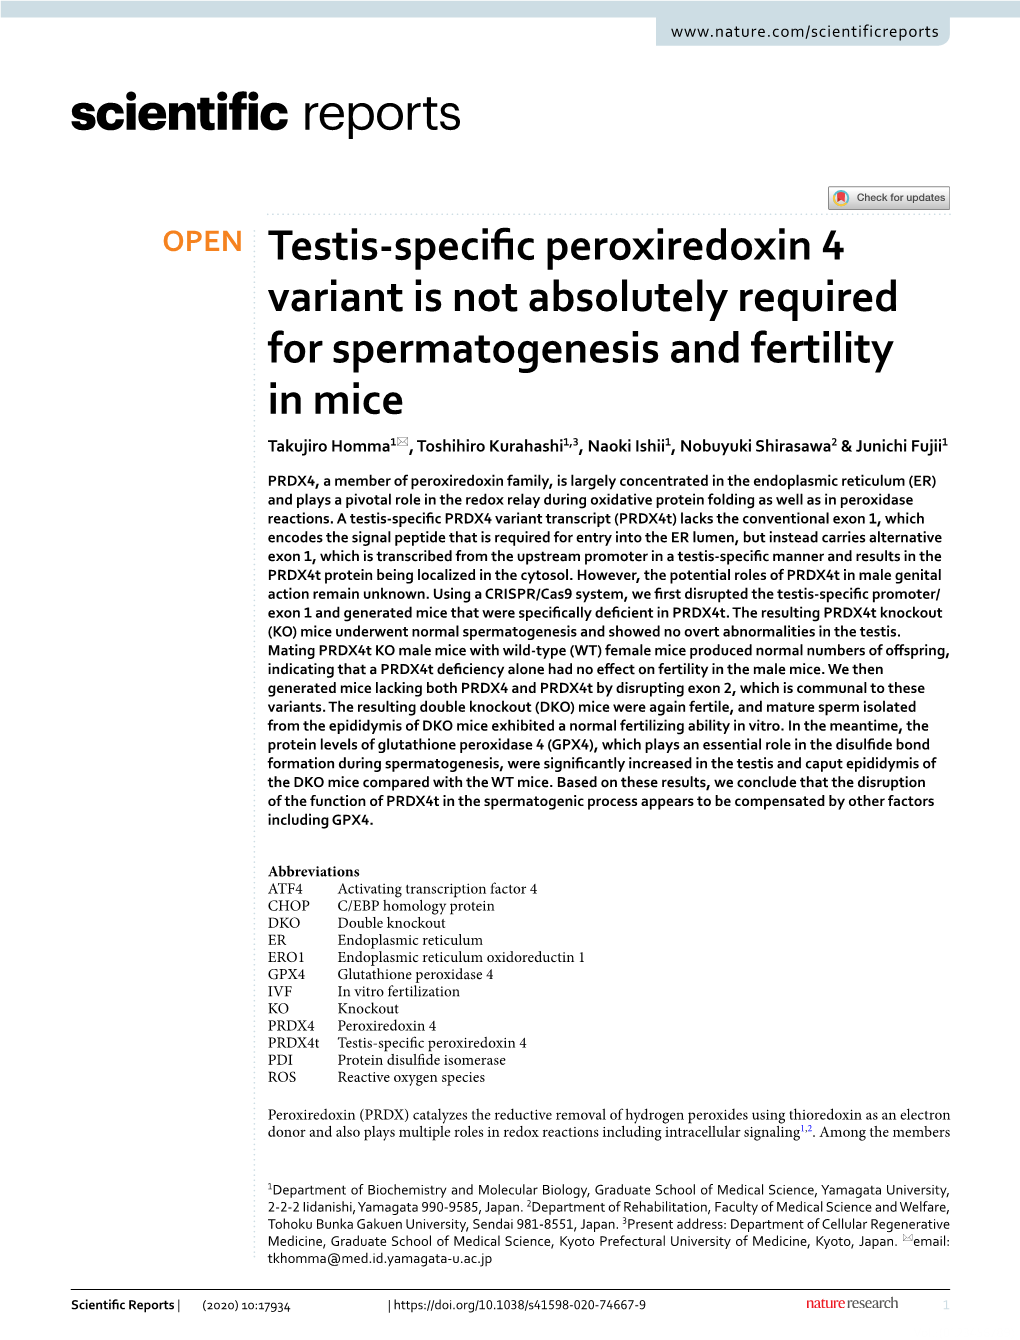 Testis-Specific Peroxiredoxin 4 Variant Is Not Absolutely Required